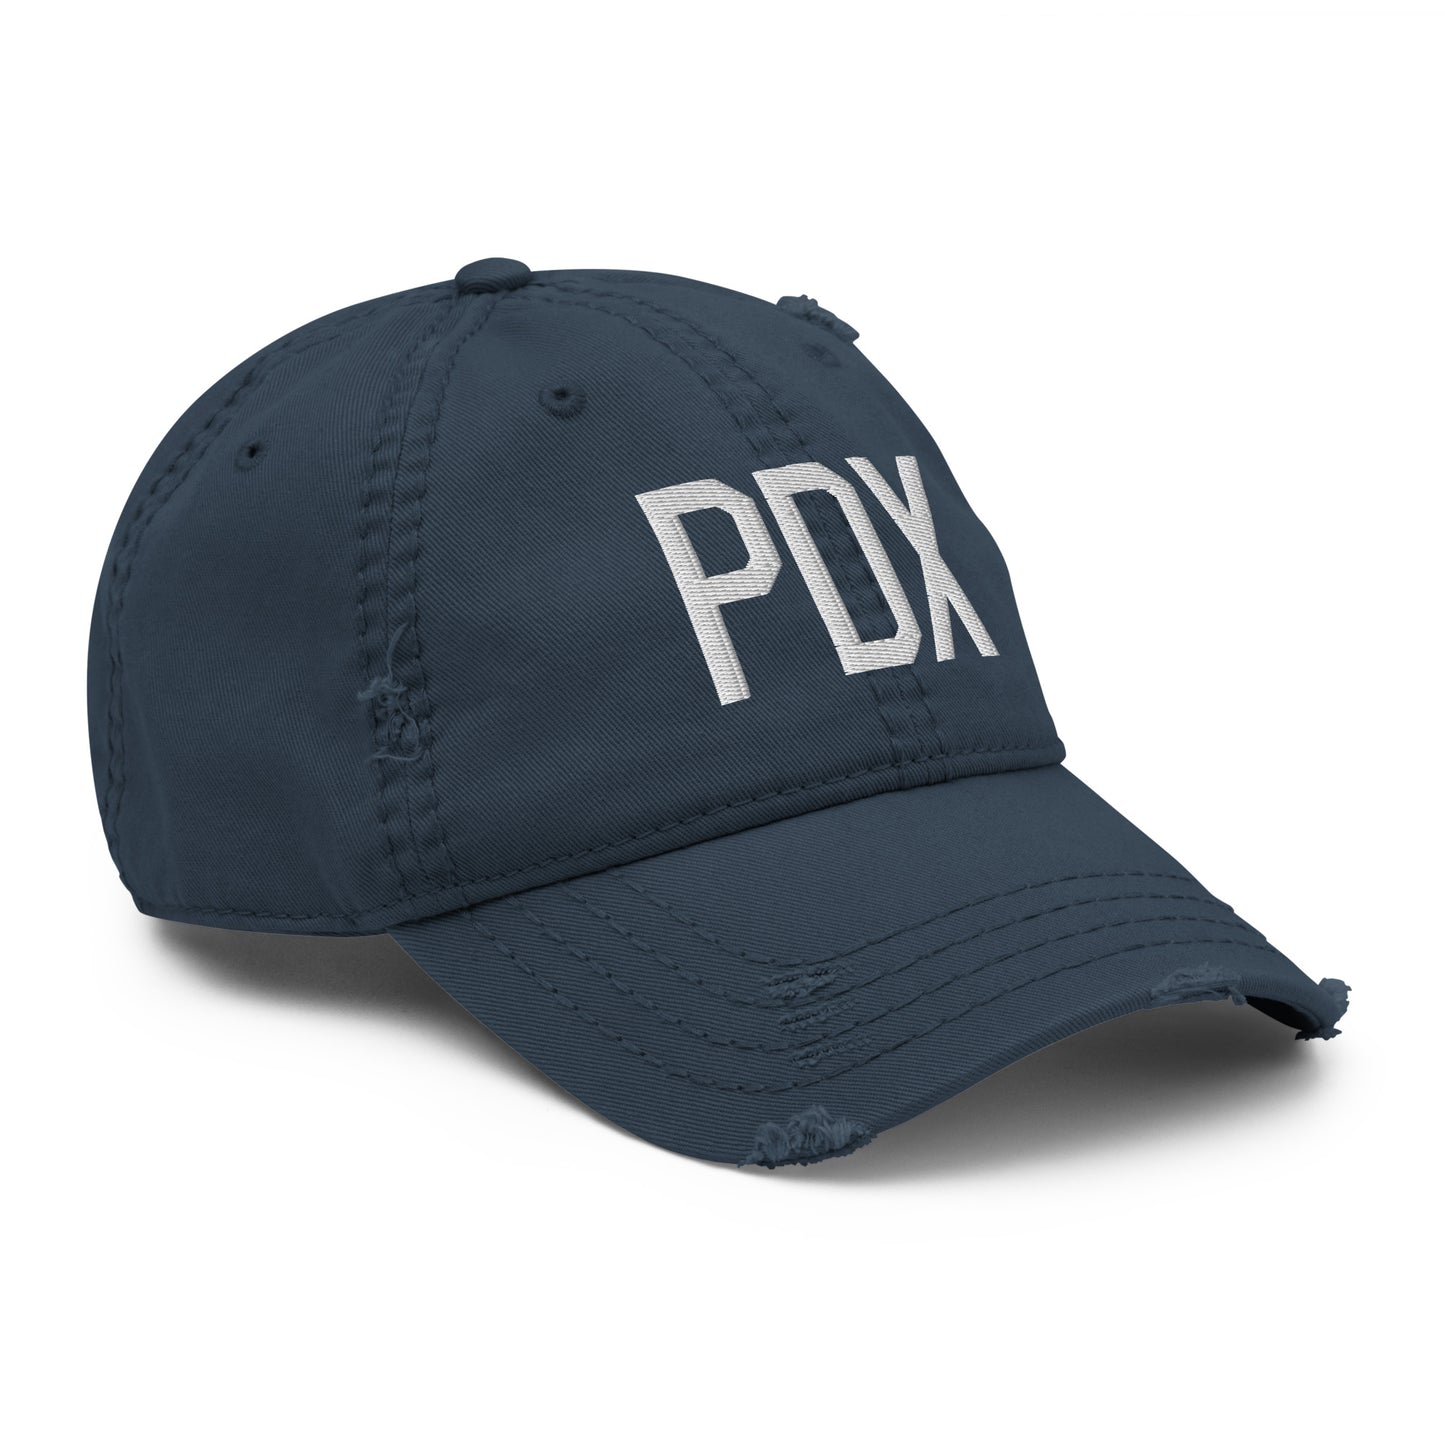 Airport Code Distressed Hat - White • PDX Portland • YHM Designs - Image 14